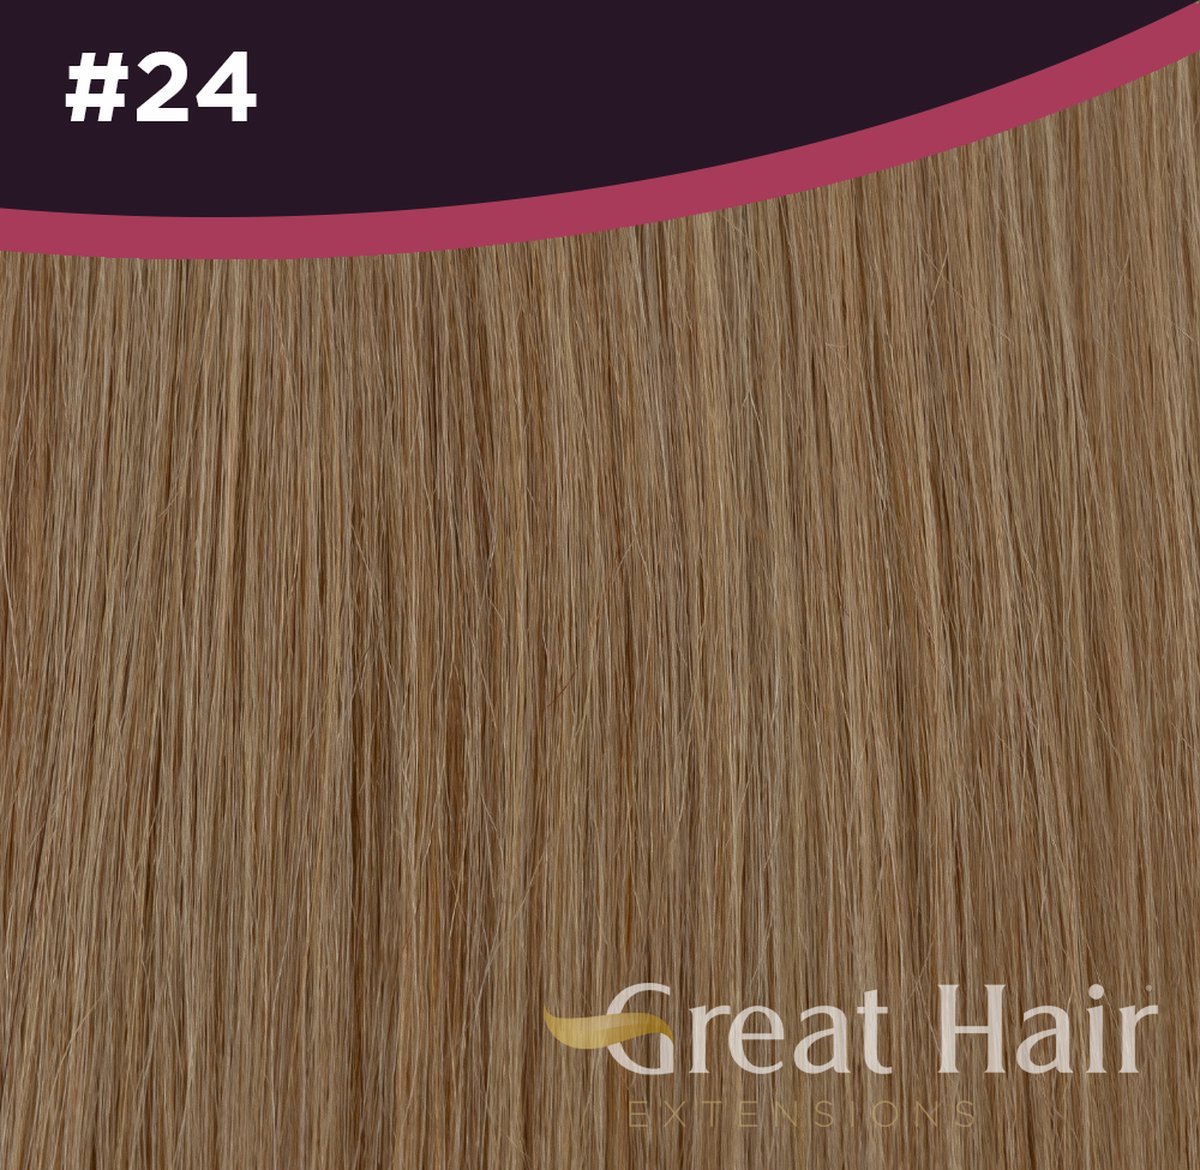 Great Hair Extensions Tape Extensions #24 50cm